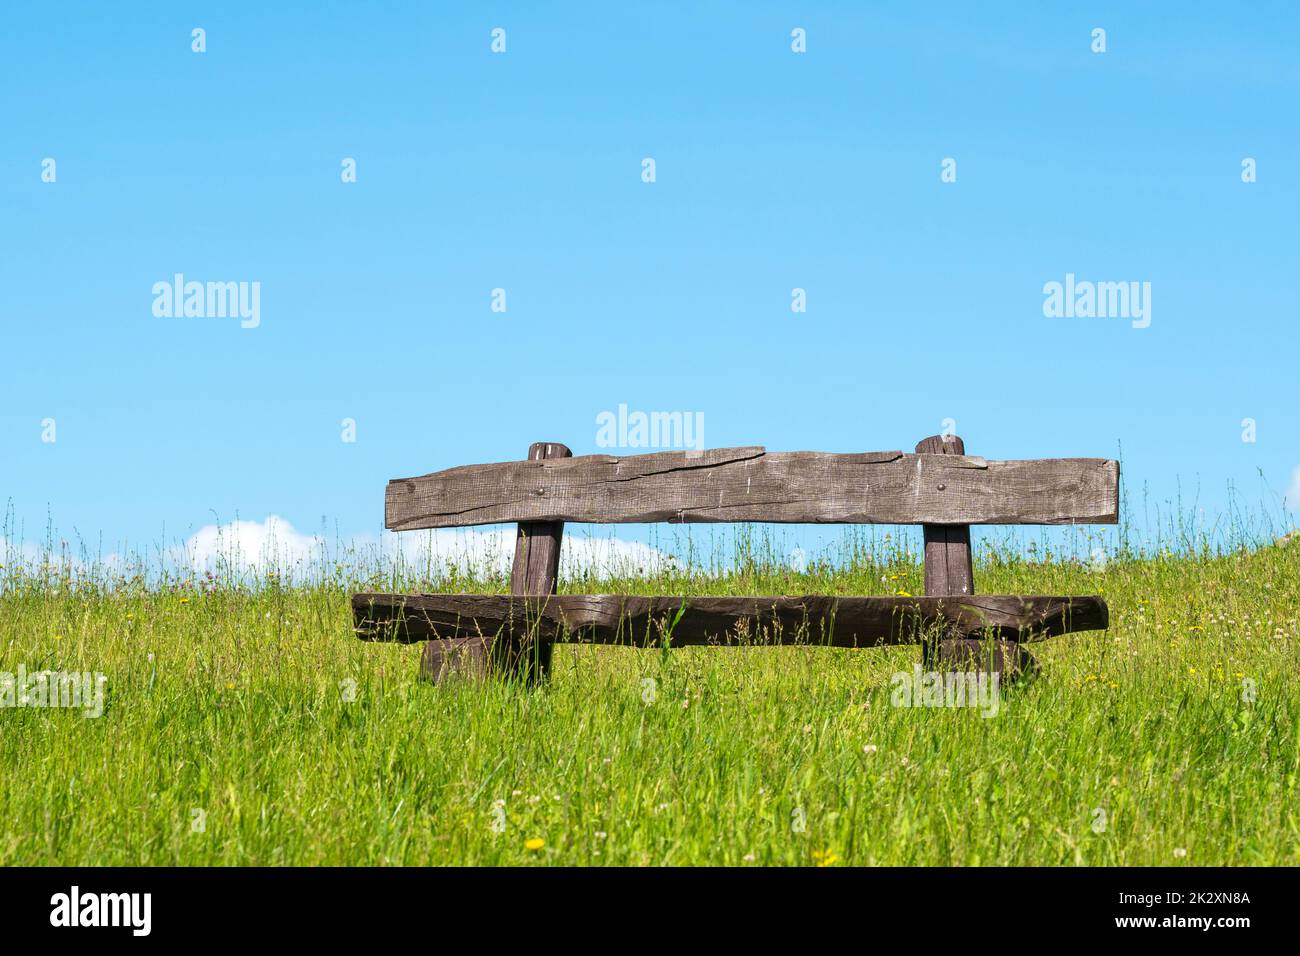 Empty bench in natural green untrimmed grass field Stock Photo